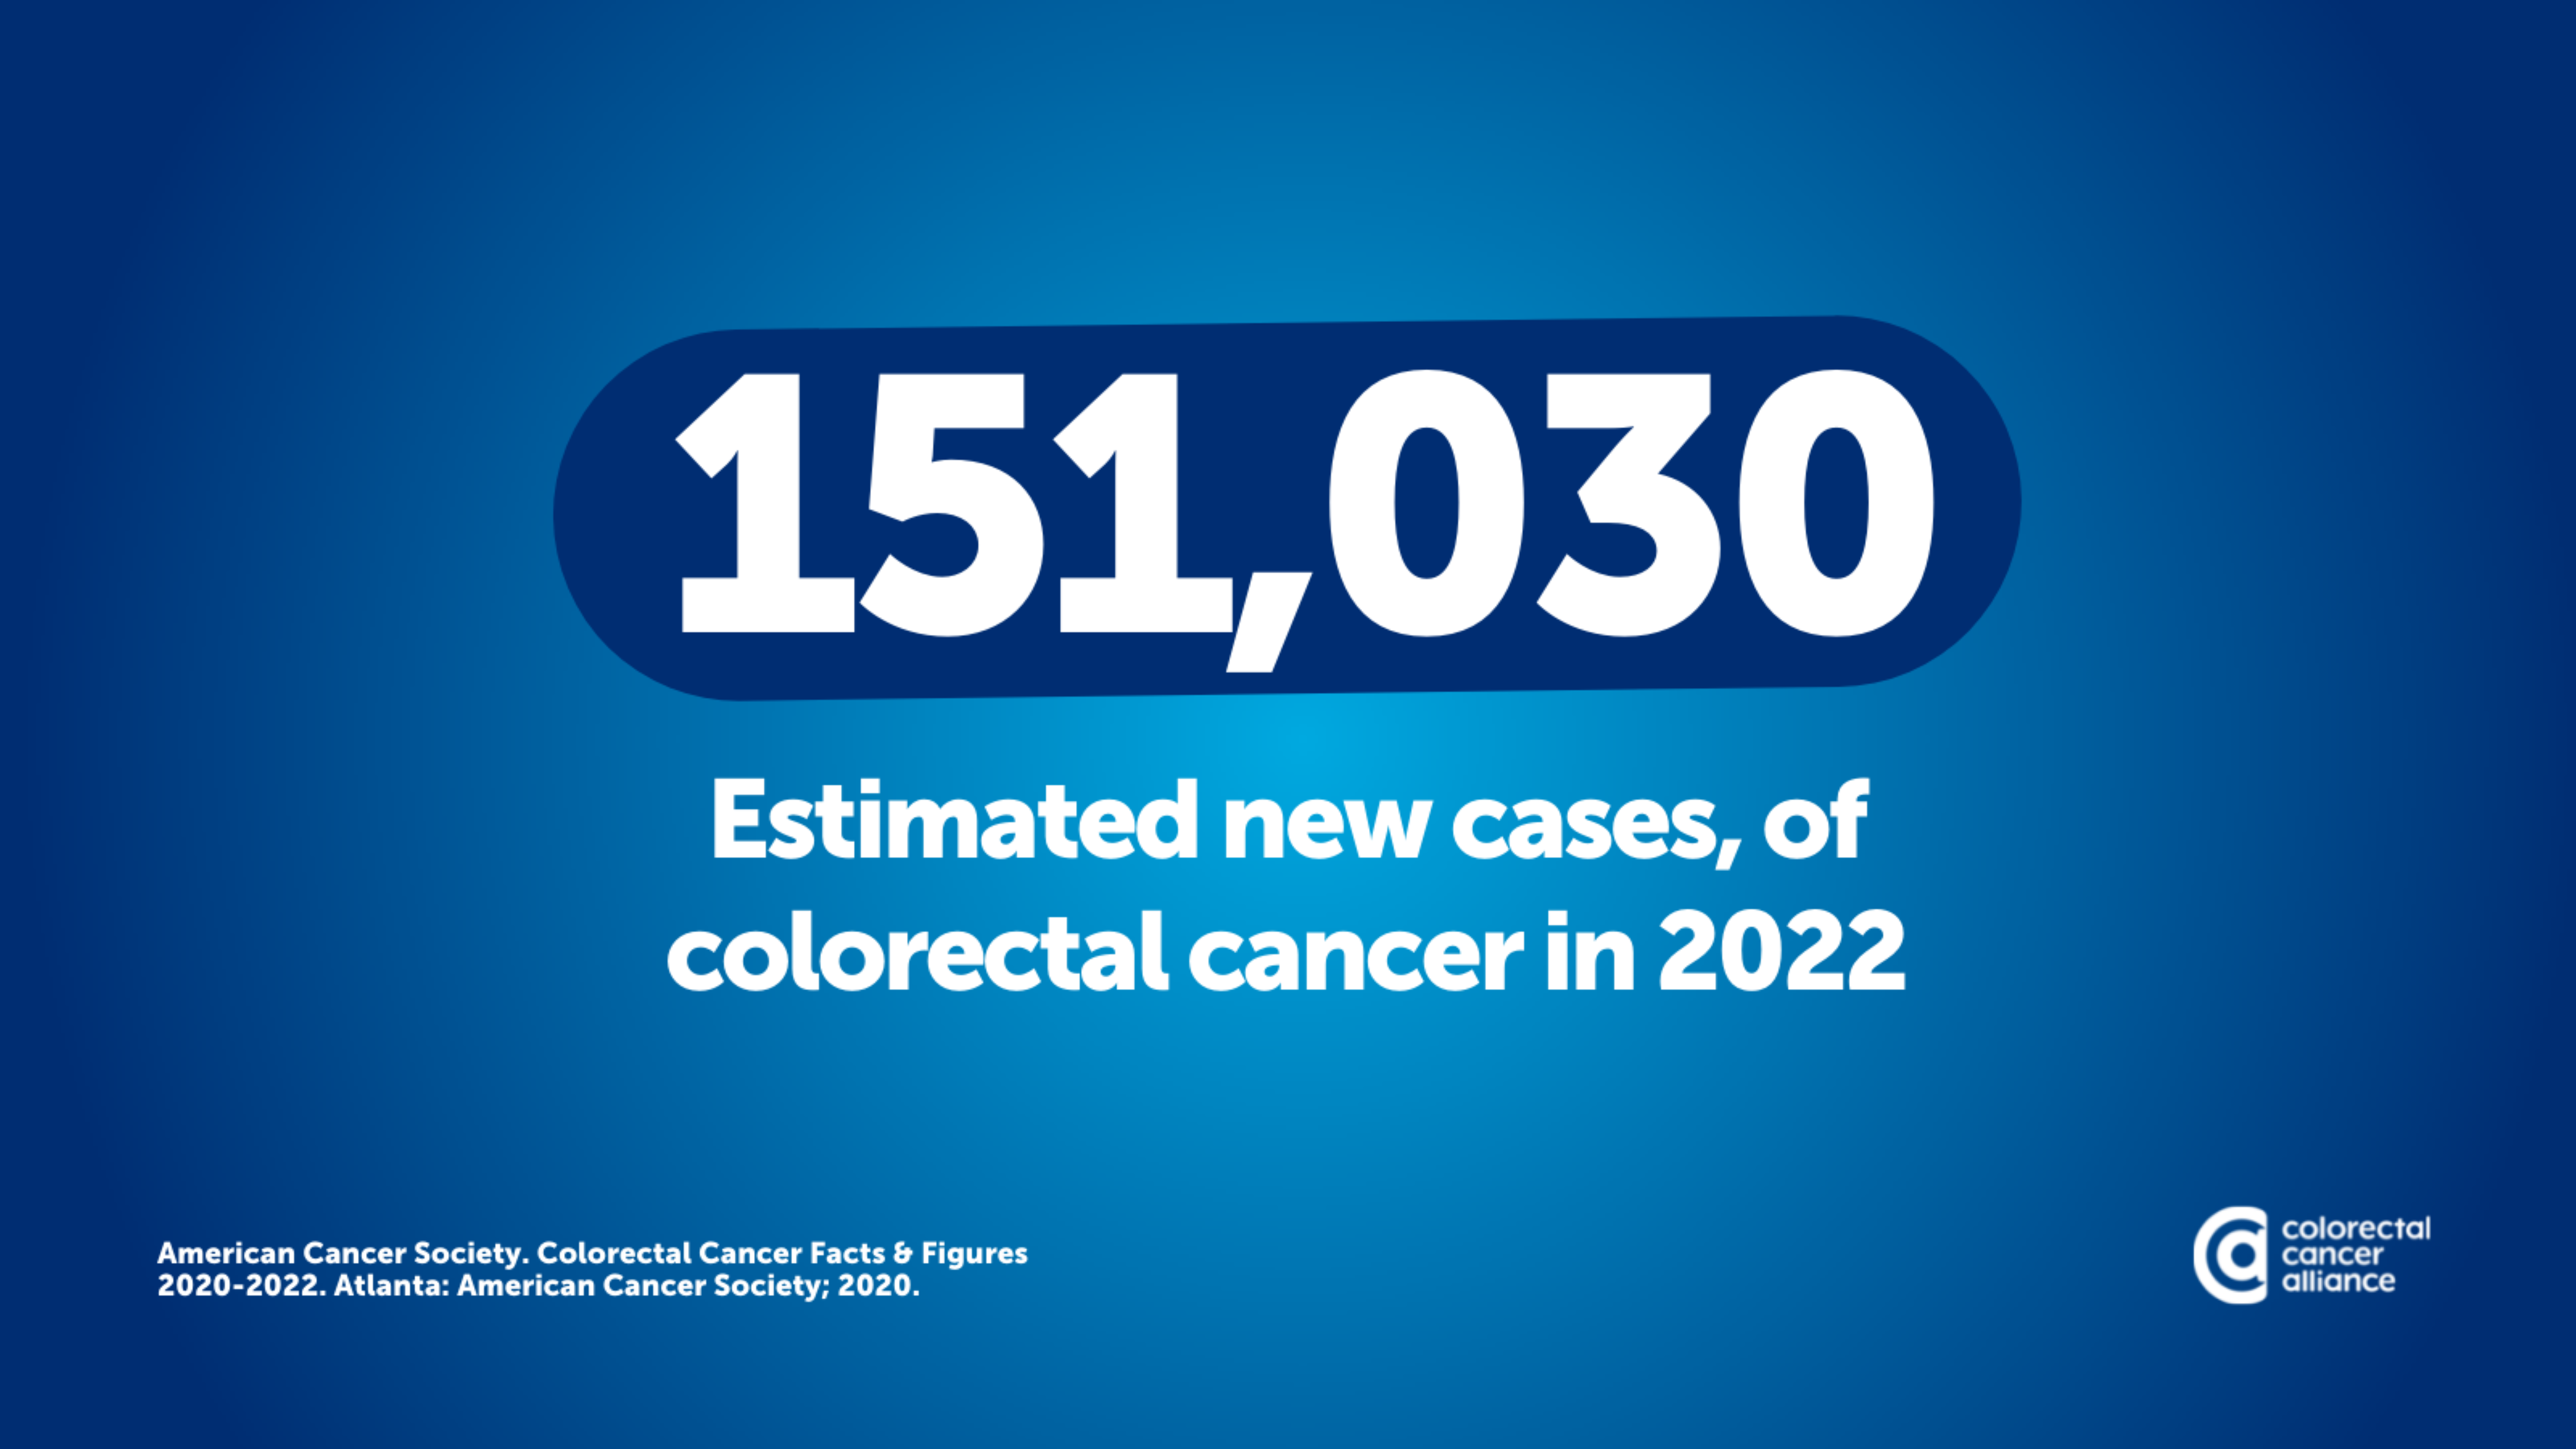 Social Media Graphic: 151,030 estimated new cases of colorectal cancer in 2022